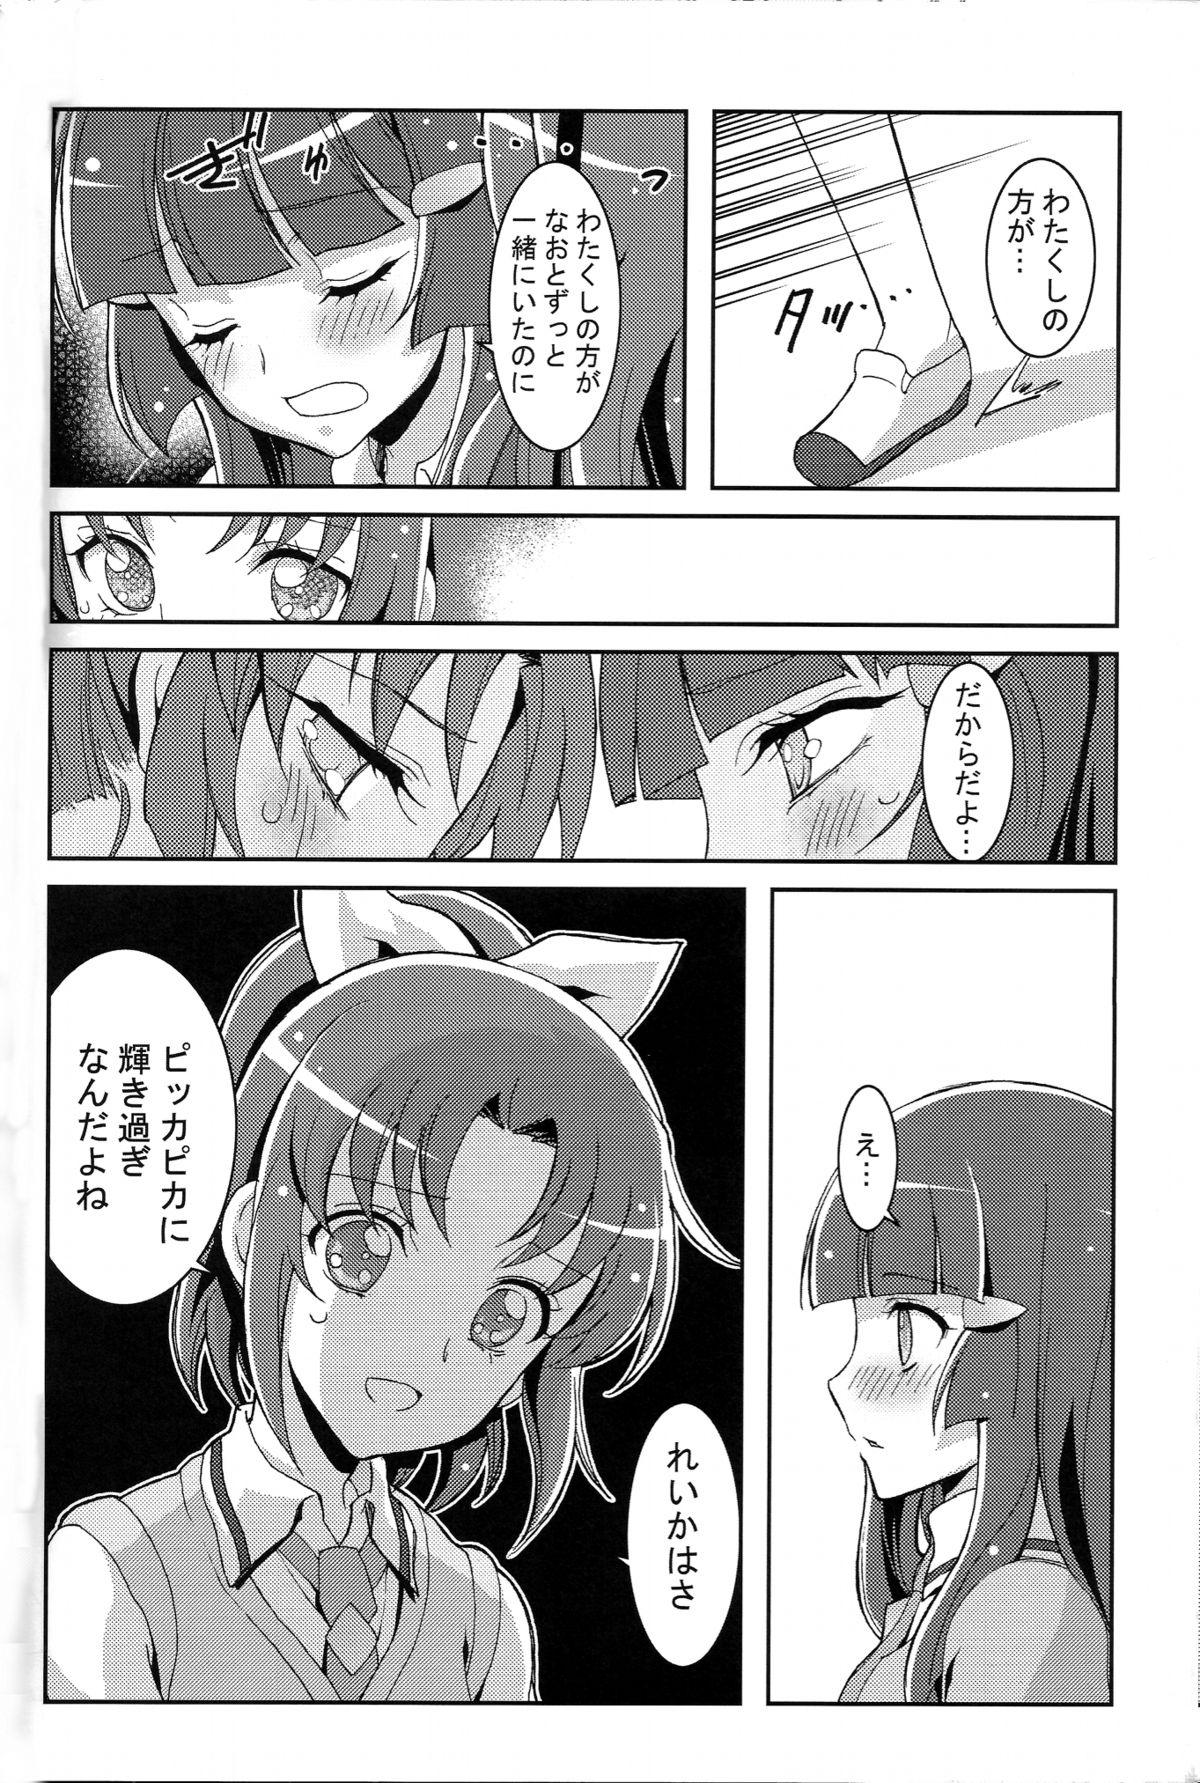 Pussylicking SMILE×SMILE - Smile precure Naked - Page 7